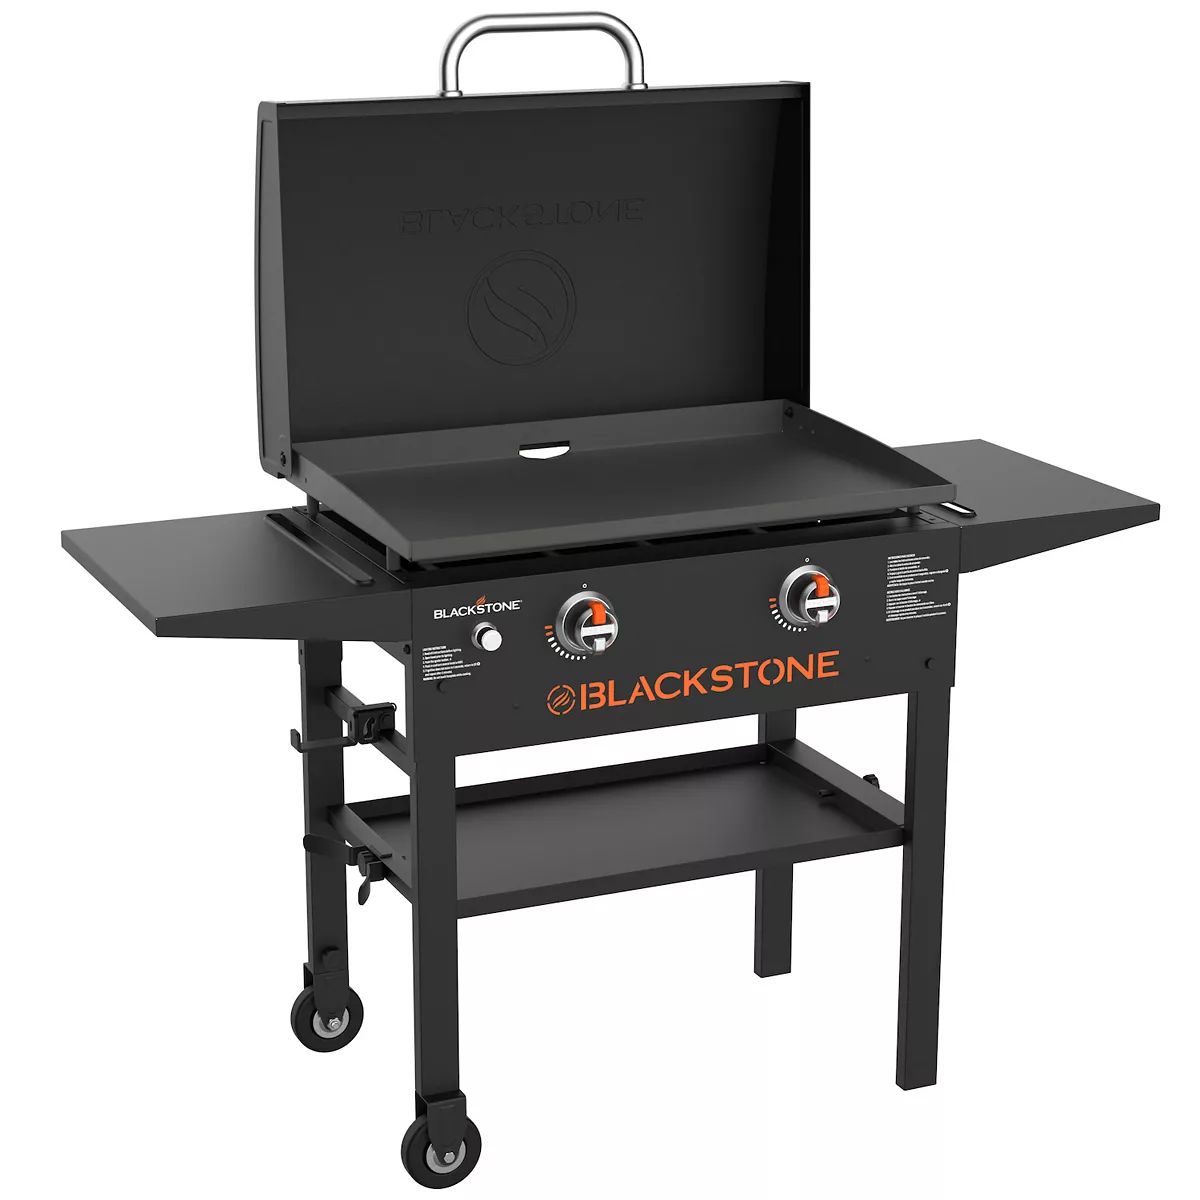 Blackstone 28-in. Griddle with Hood | Kohl's